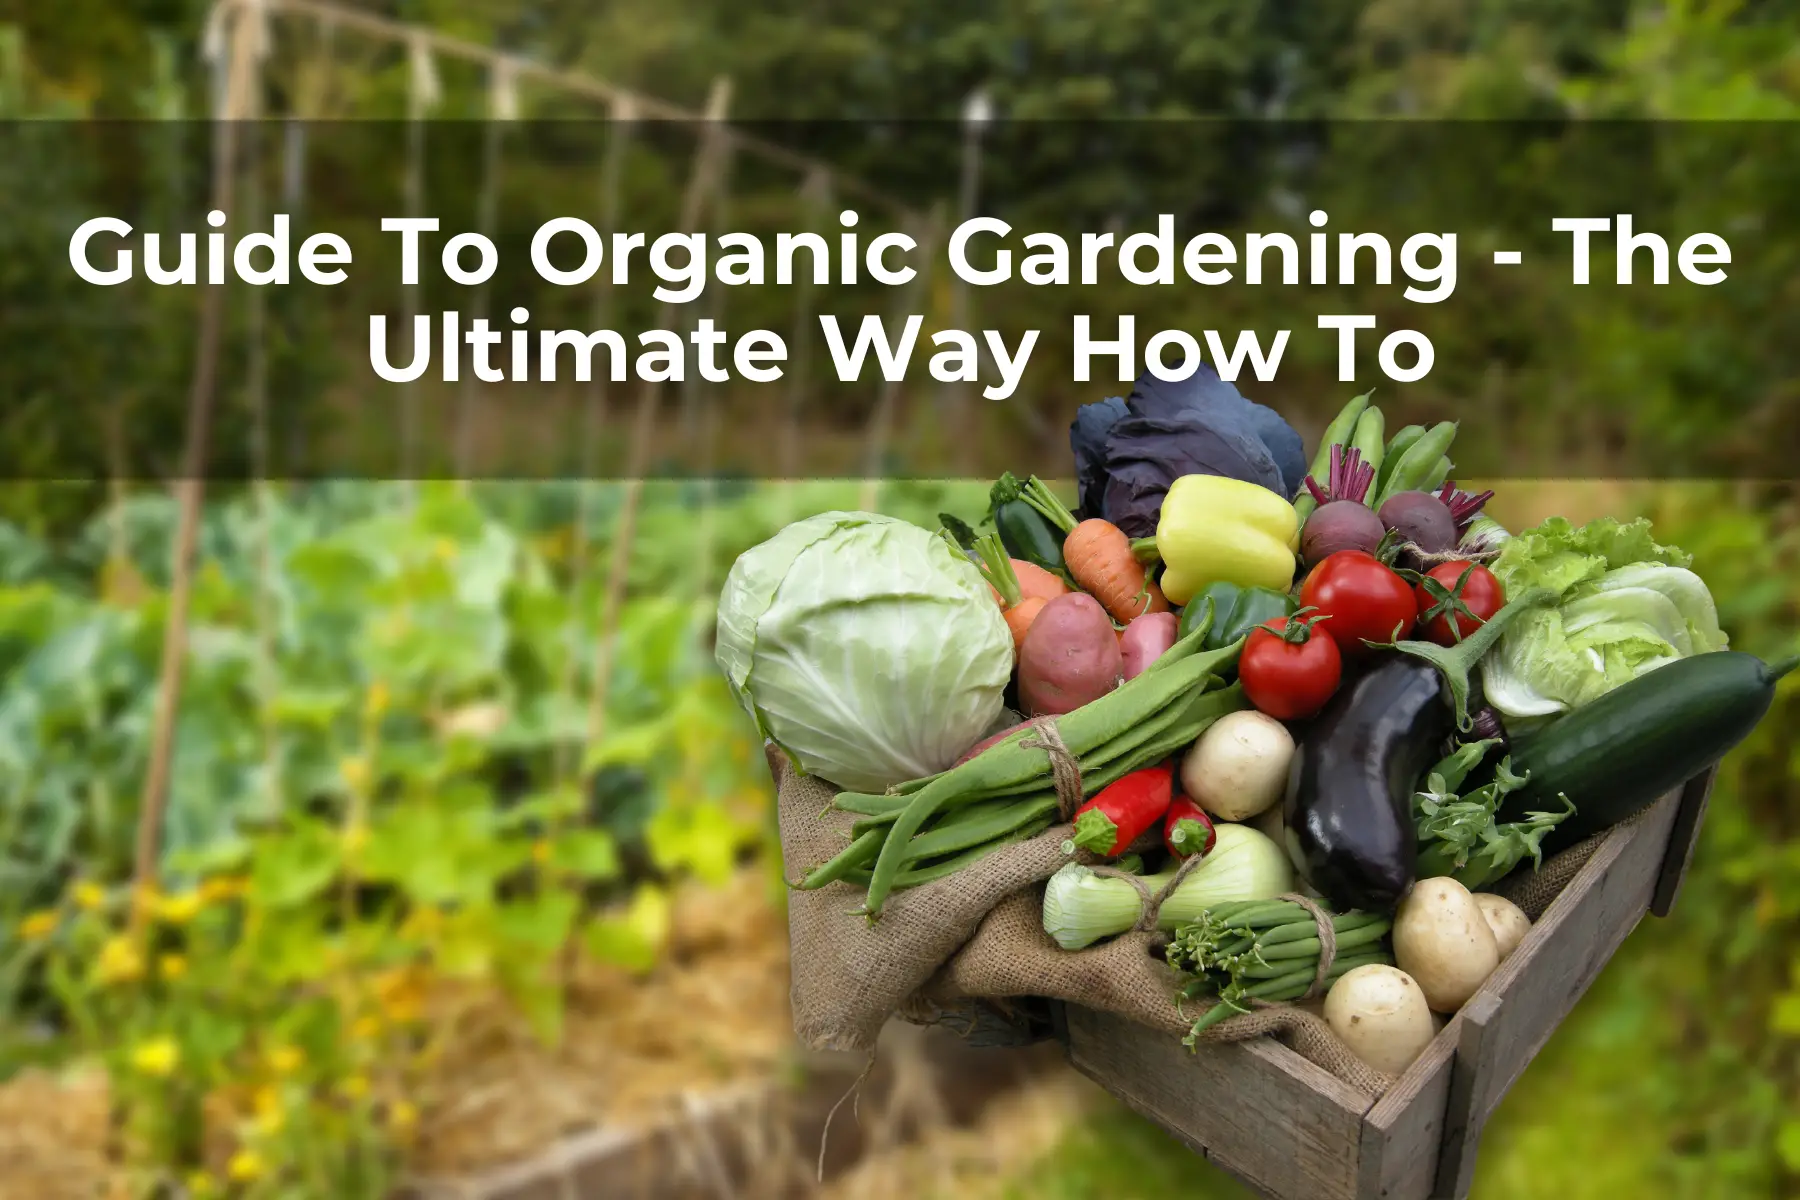 Guide To Organic Gardening - Ultimate Way How To